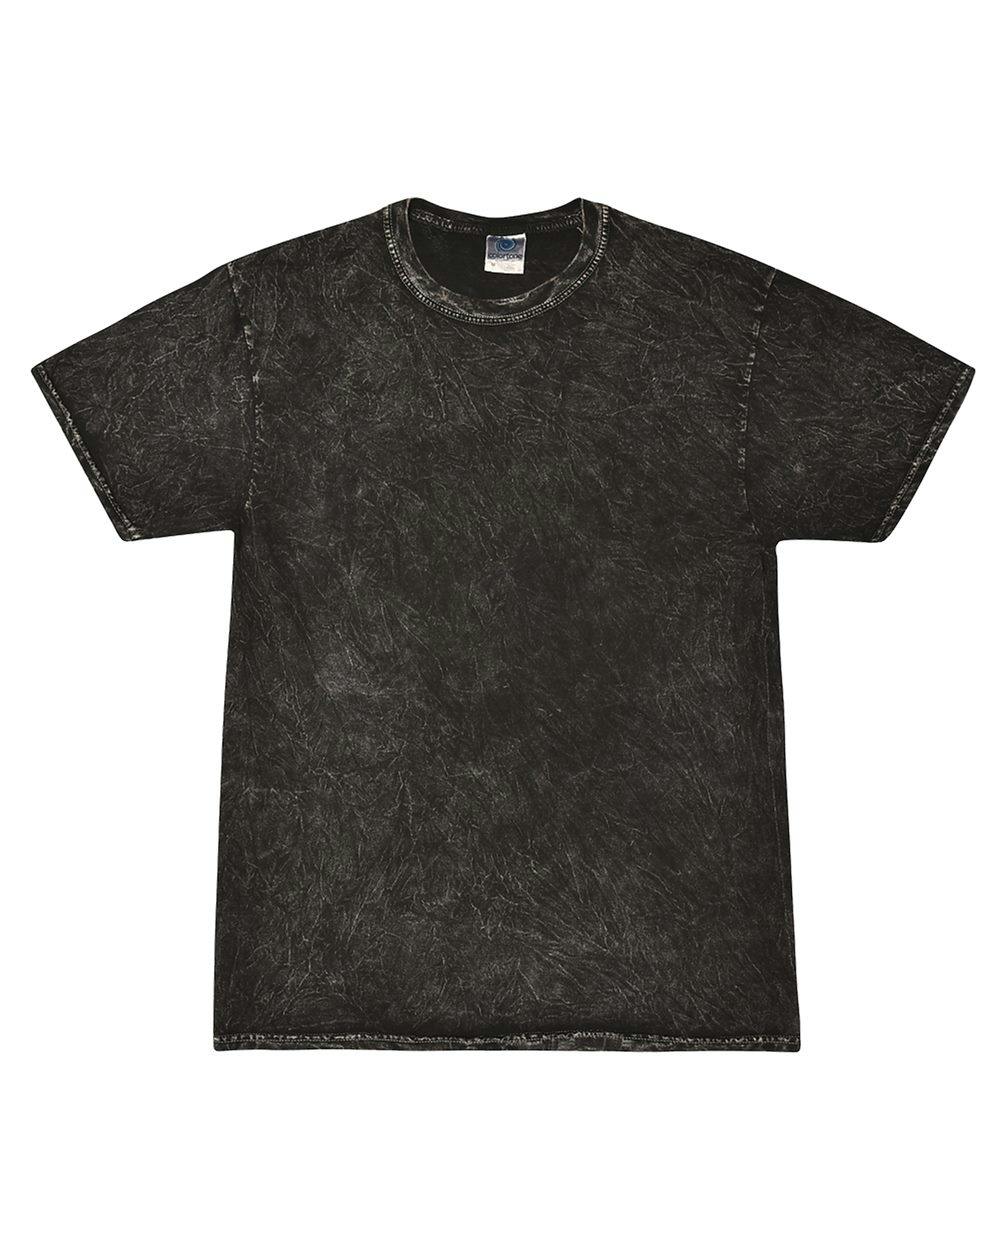 Image for Youth Mineral Wash T-Shirt - 1300Y